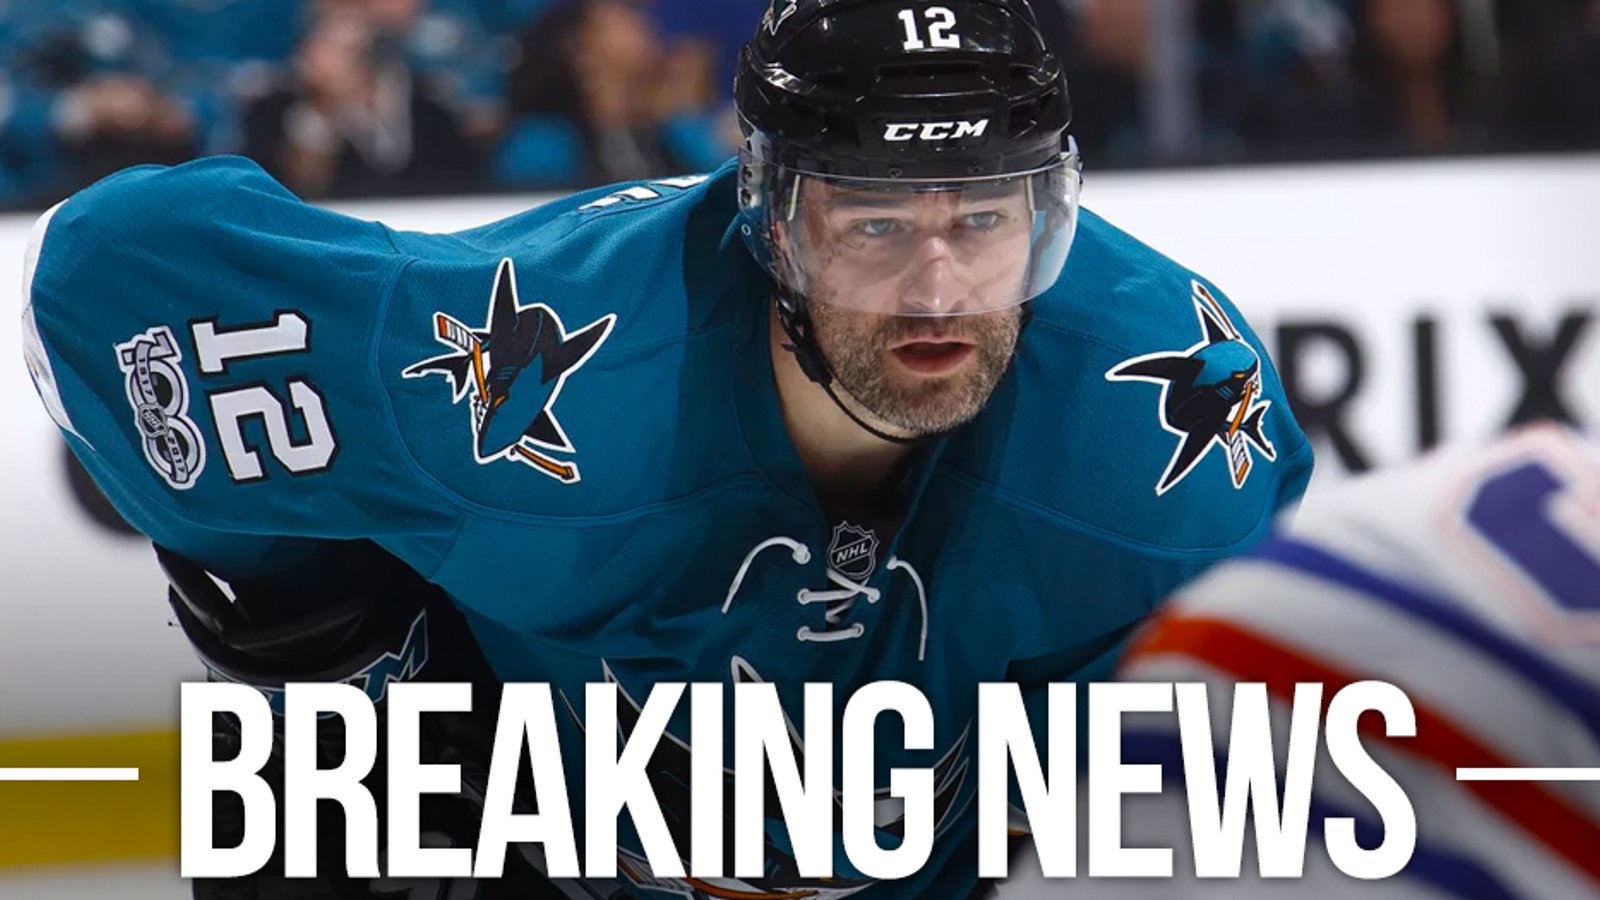 Patrick Marleau returns to San Jose, signs one year contract with Sharks